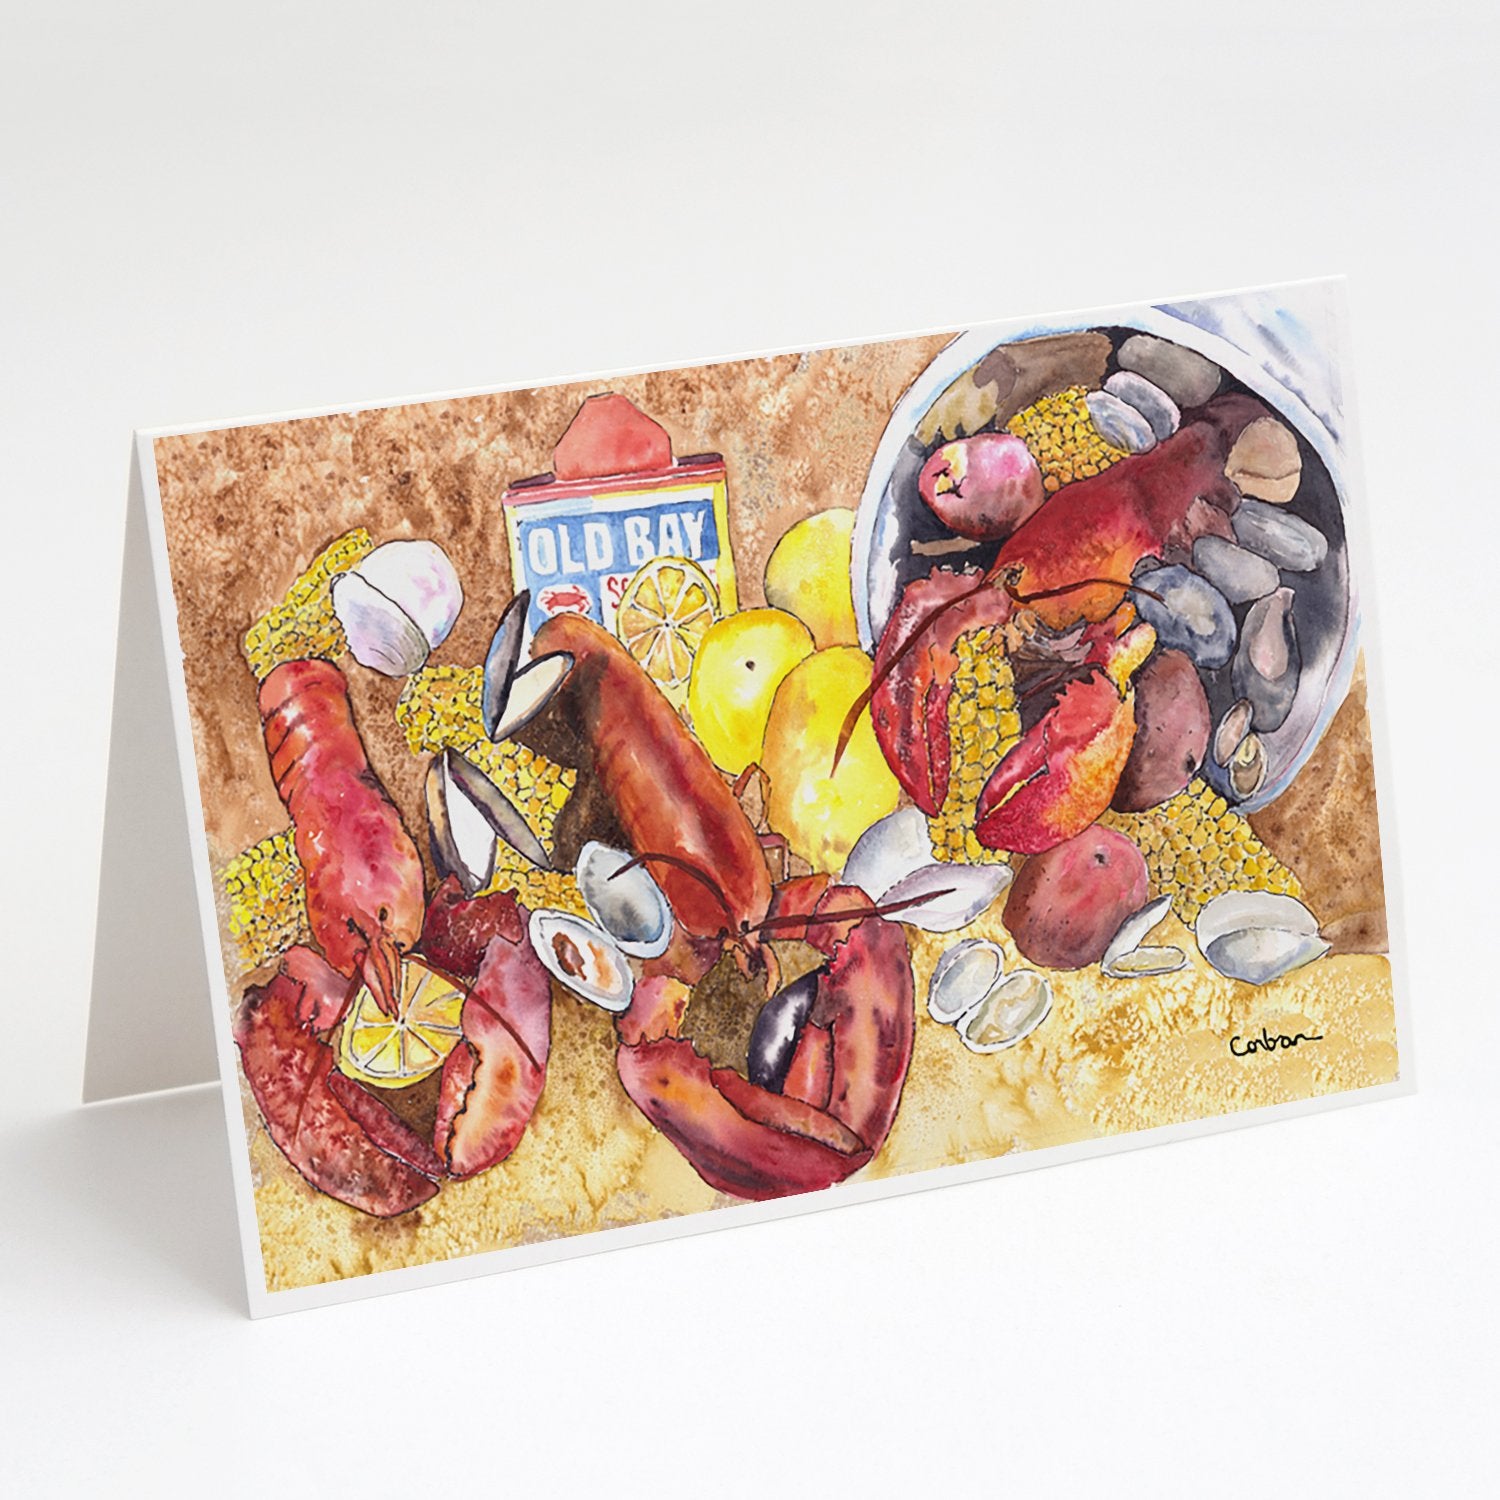 Buy this Lobster Lobster Bake with Old Bay Seasonings Greeting Cards and Envelopes Pack of 8